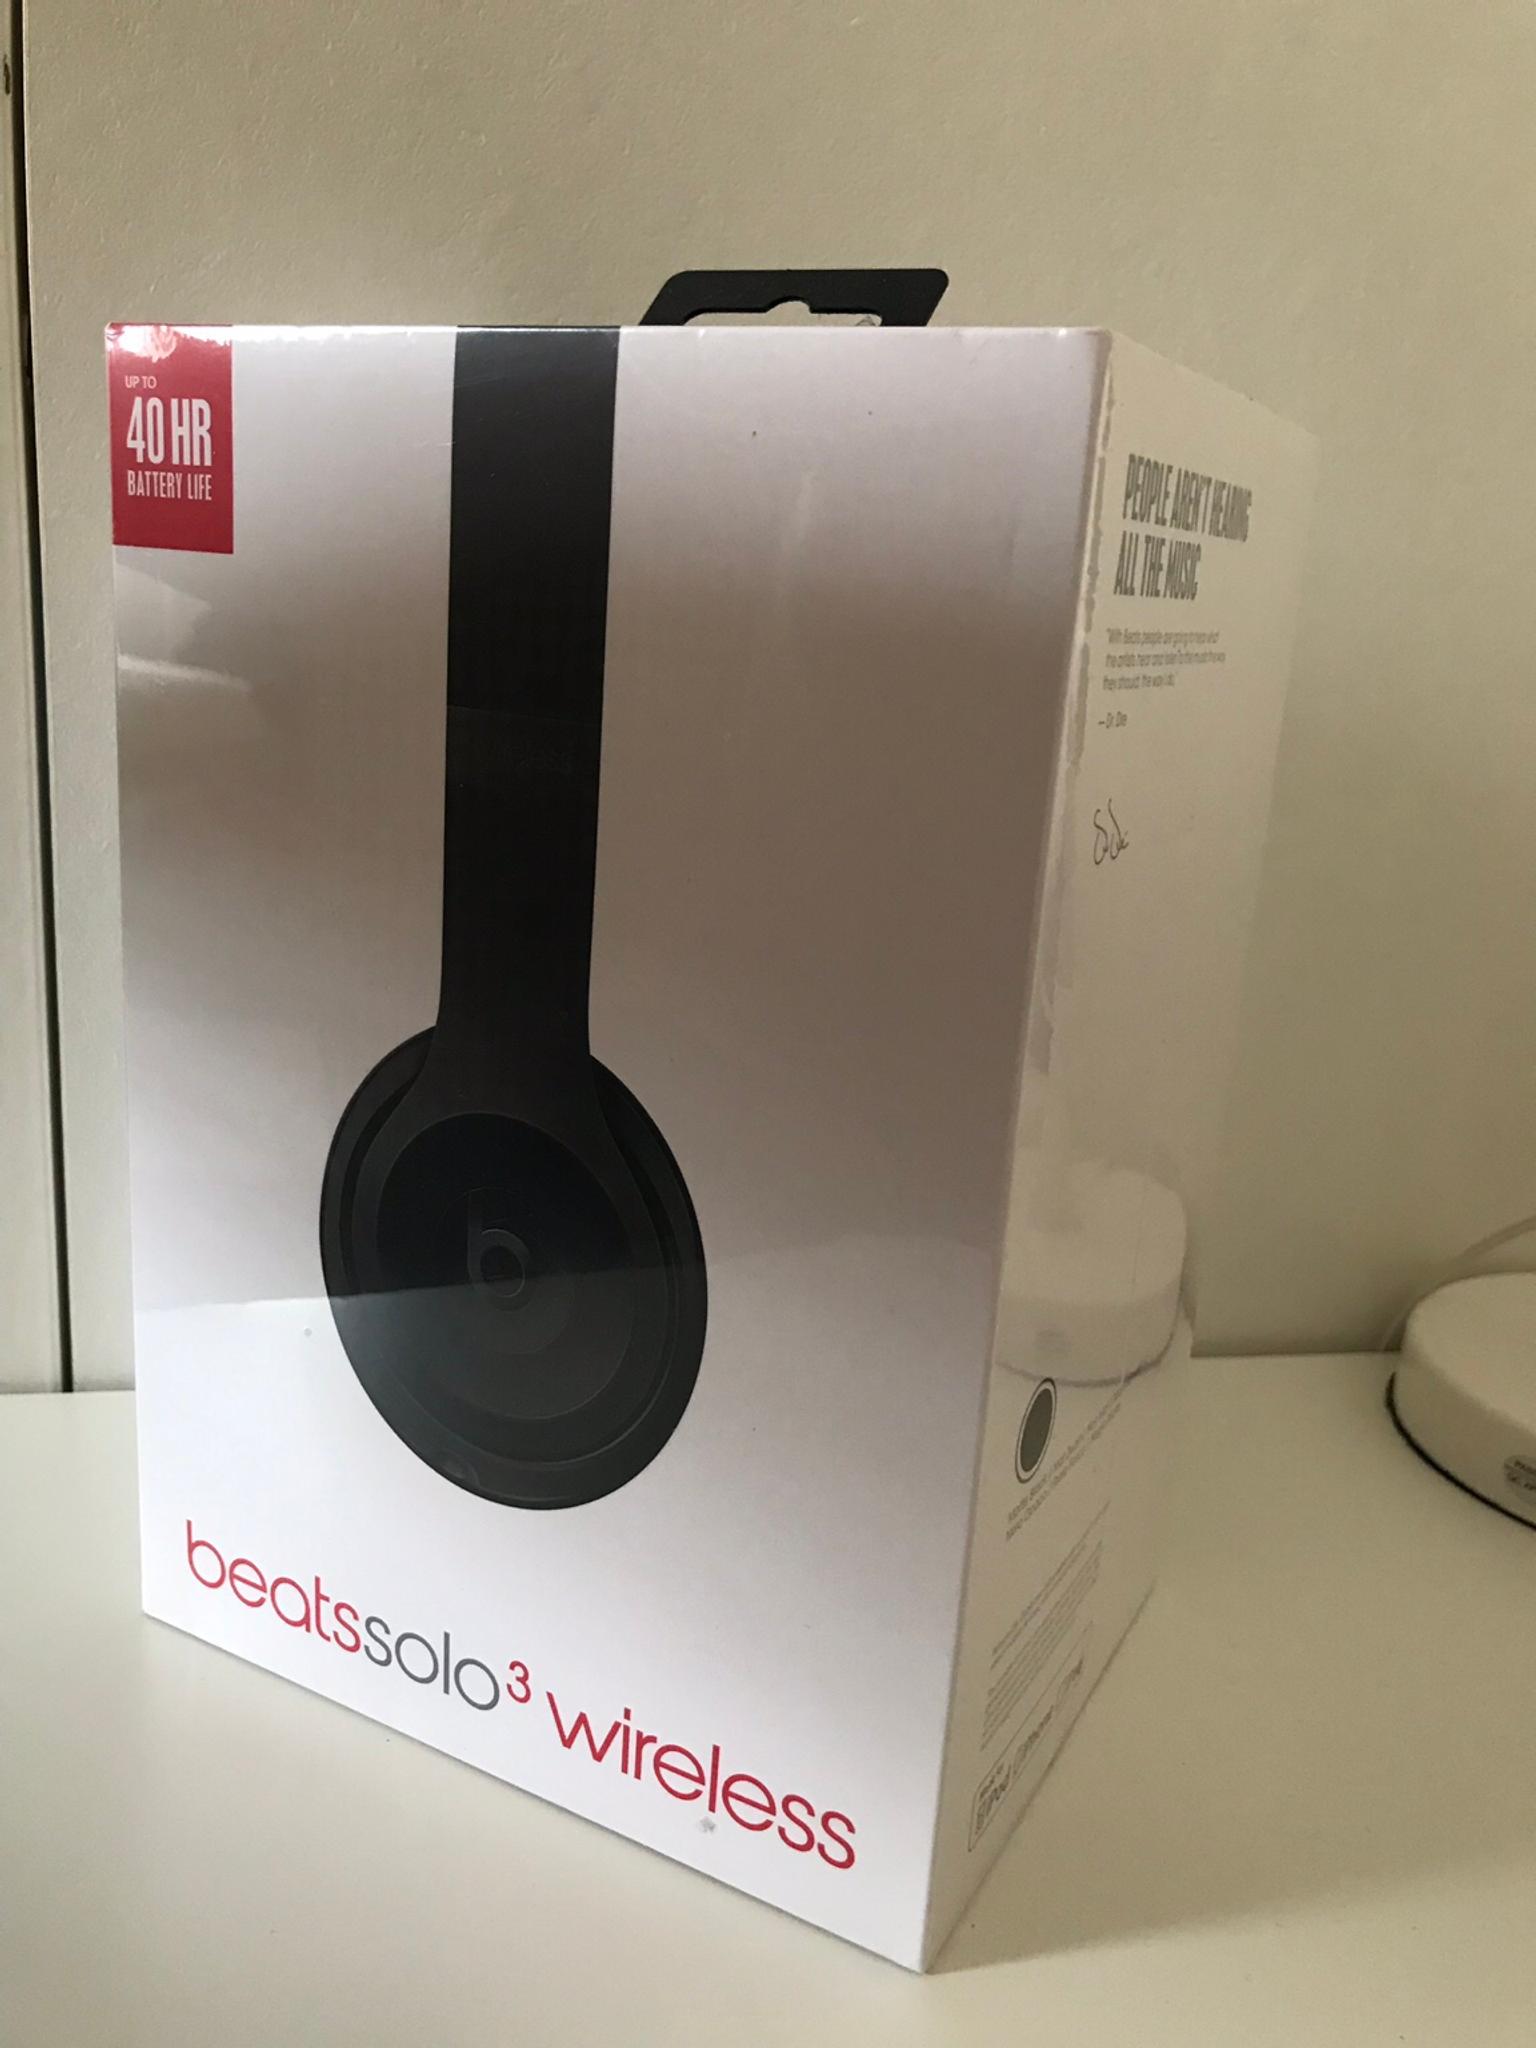 beats solo 3 packaging